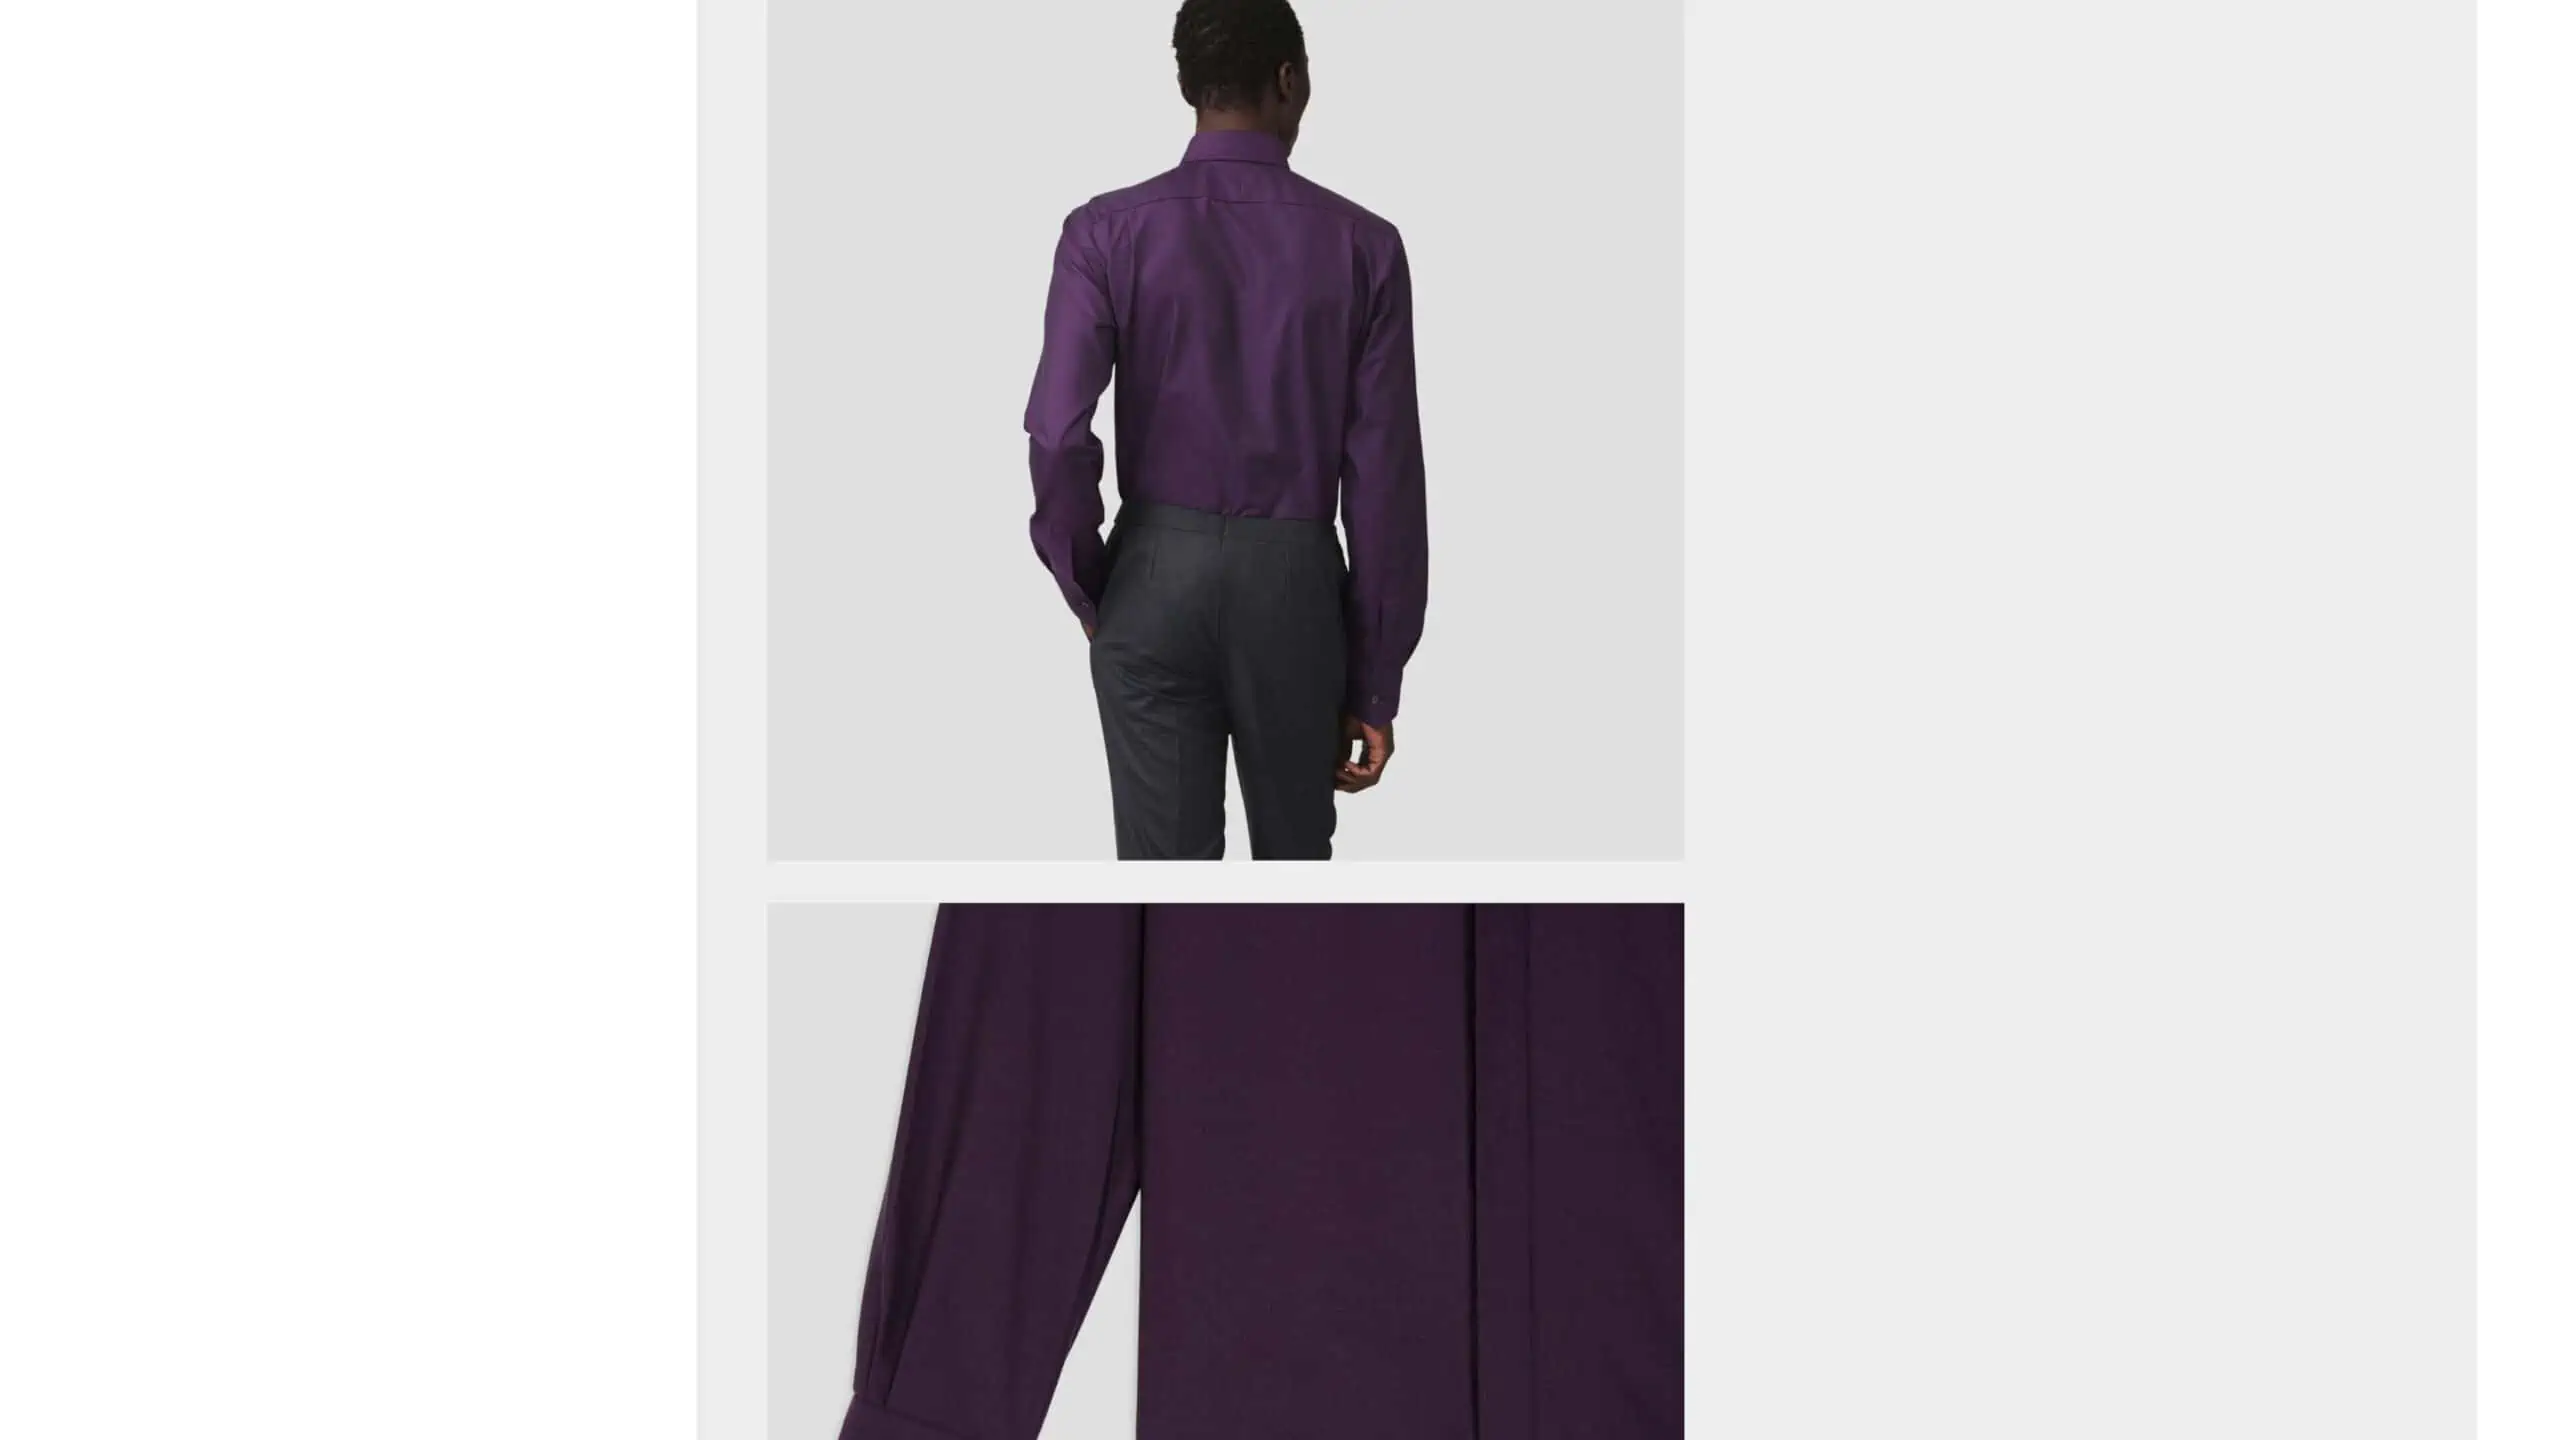 The bold color of the purple dress shirt